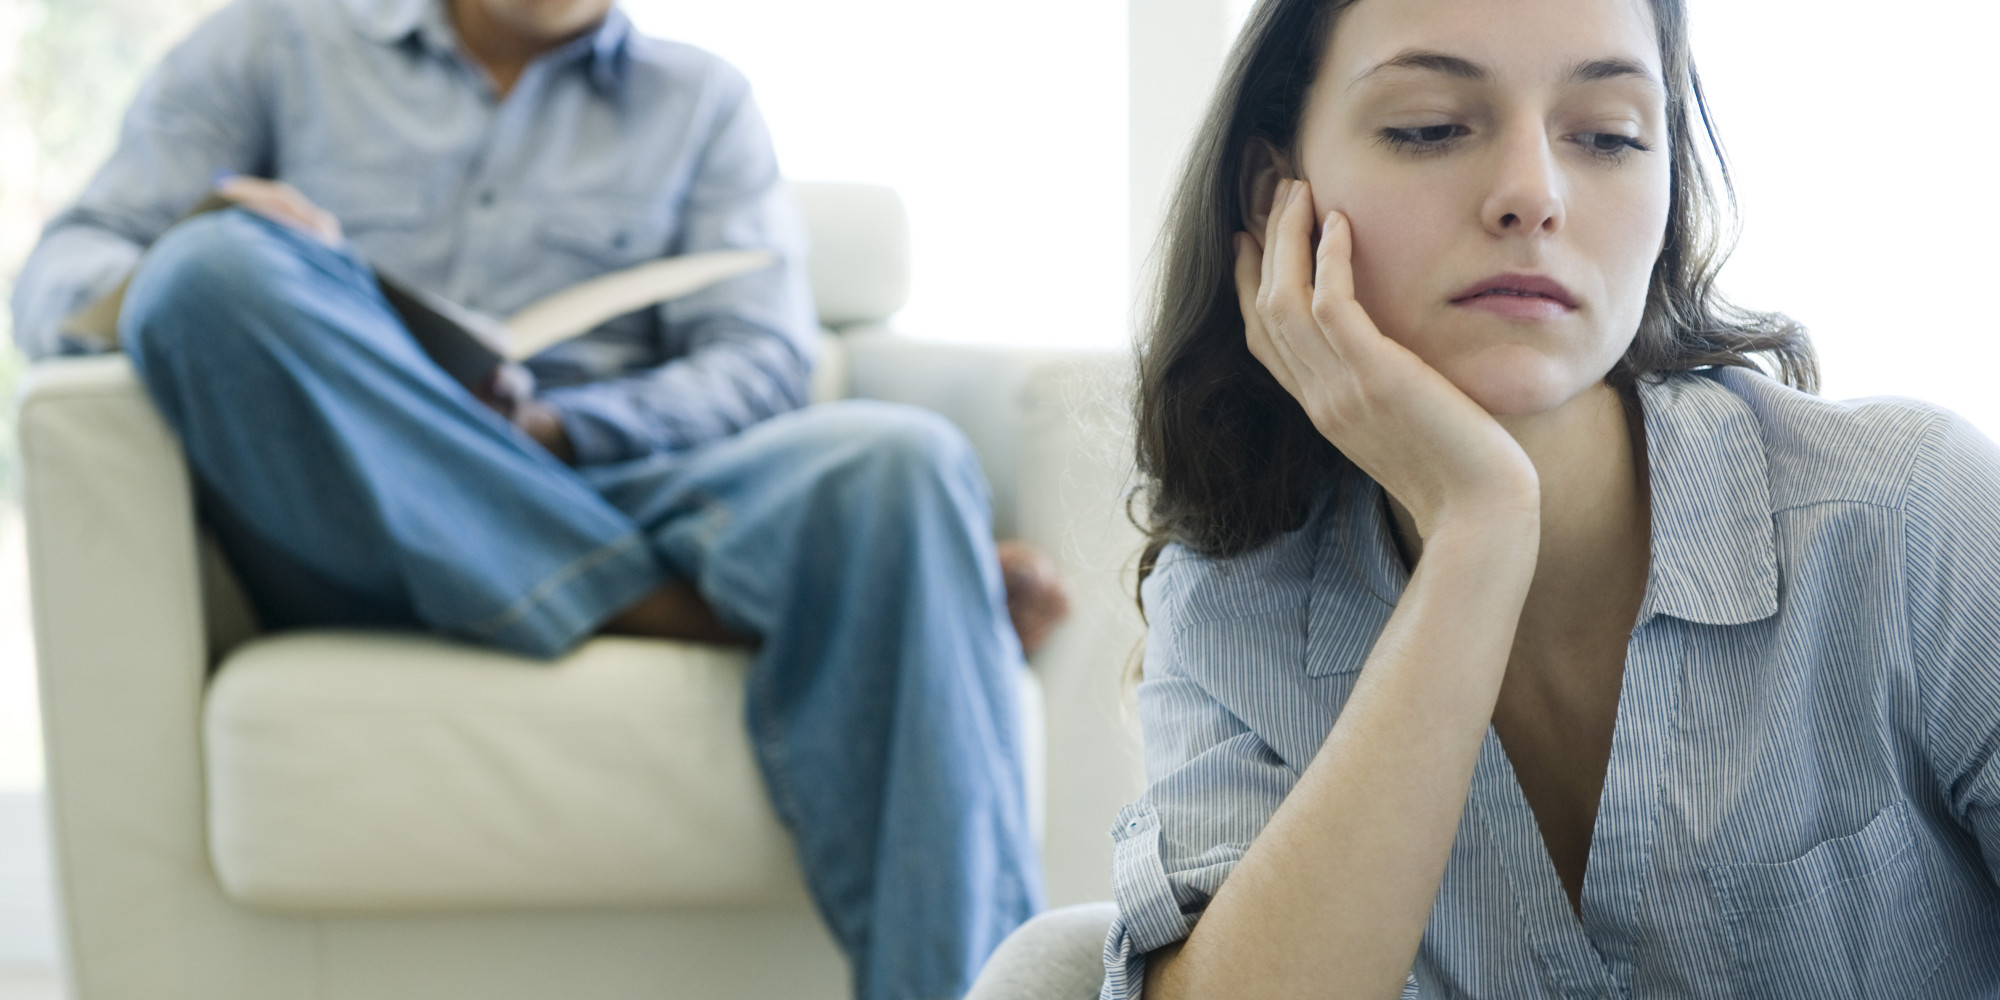 18 Hard Earned Relationship Lessons From The Divorced